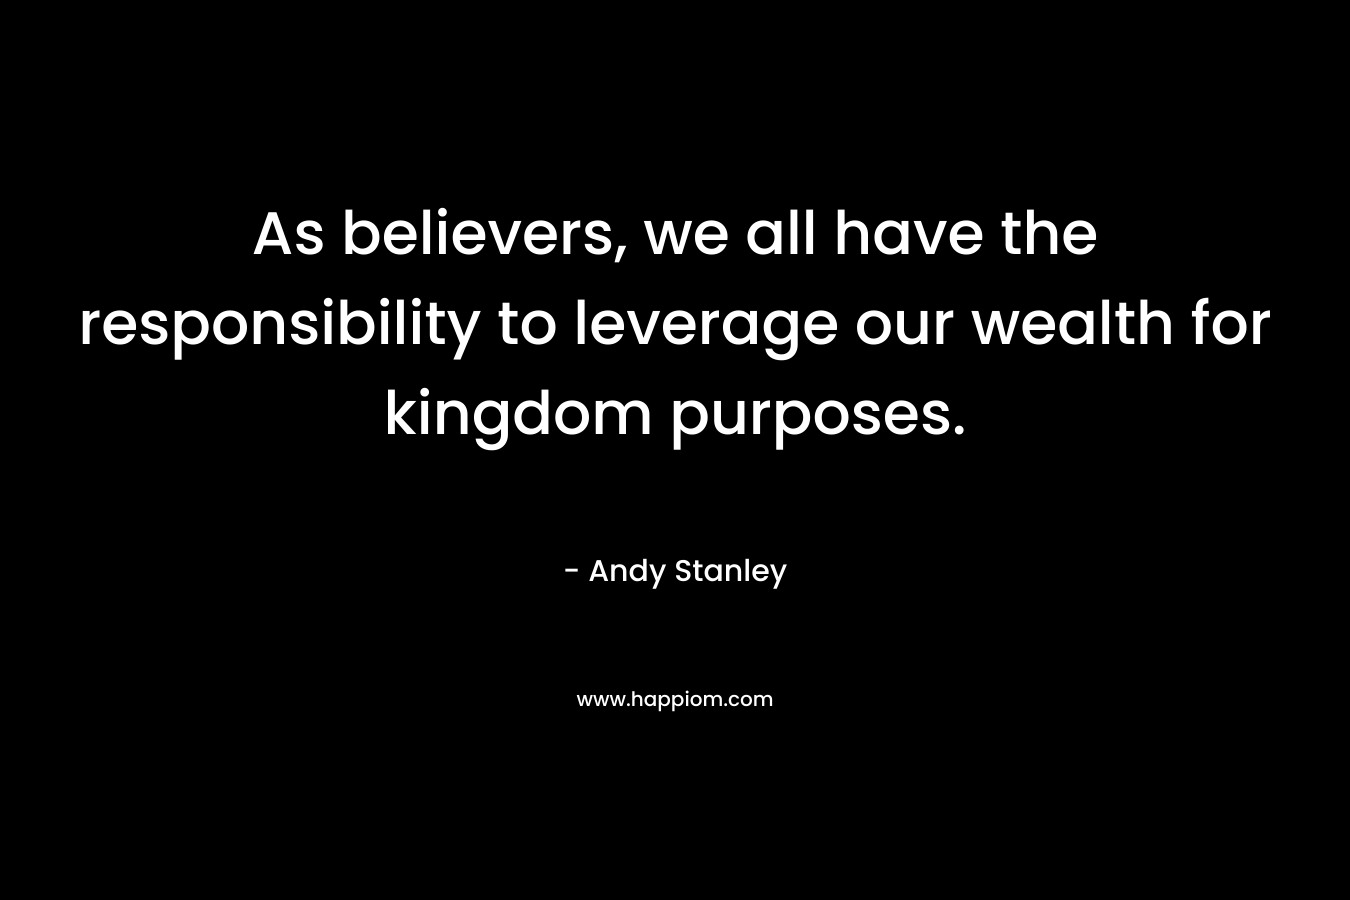 As believers, we all have the responsibility to leverage our wealth for kingdom purposes.